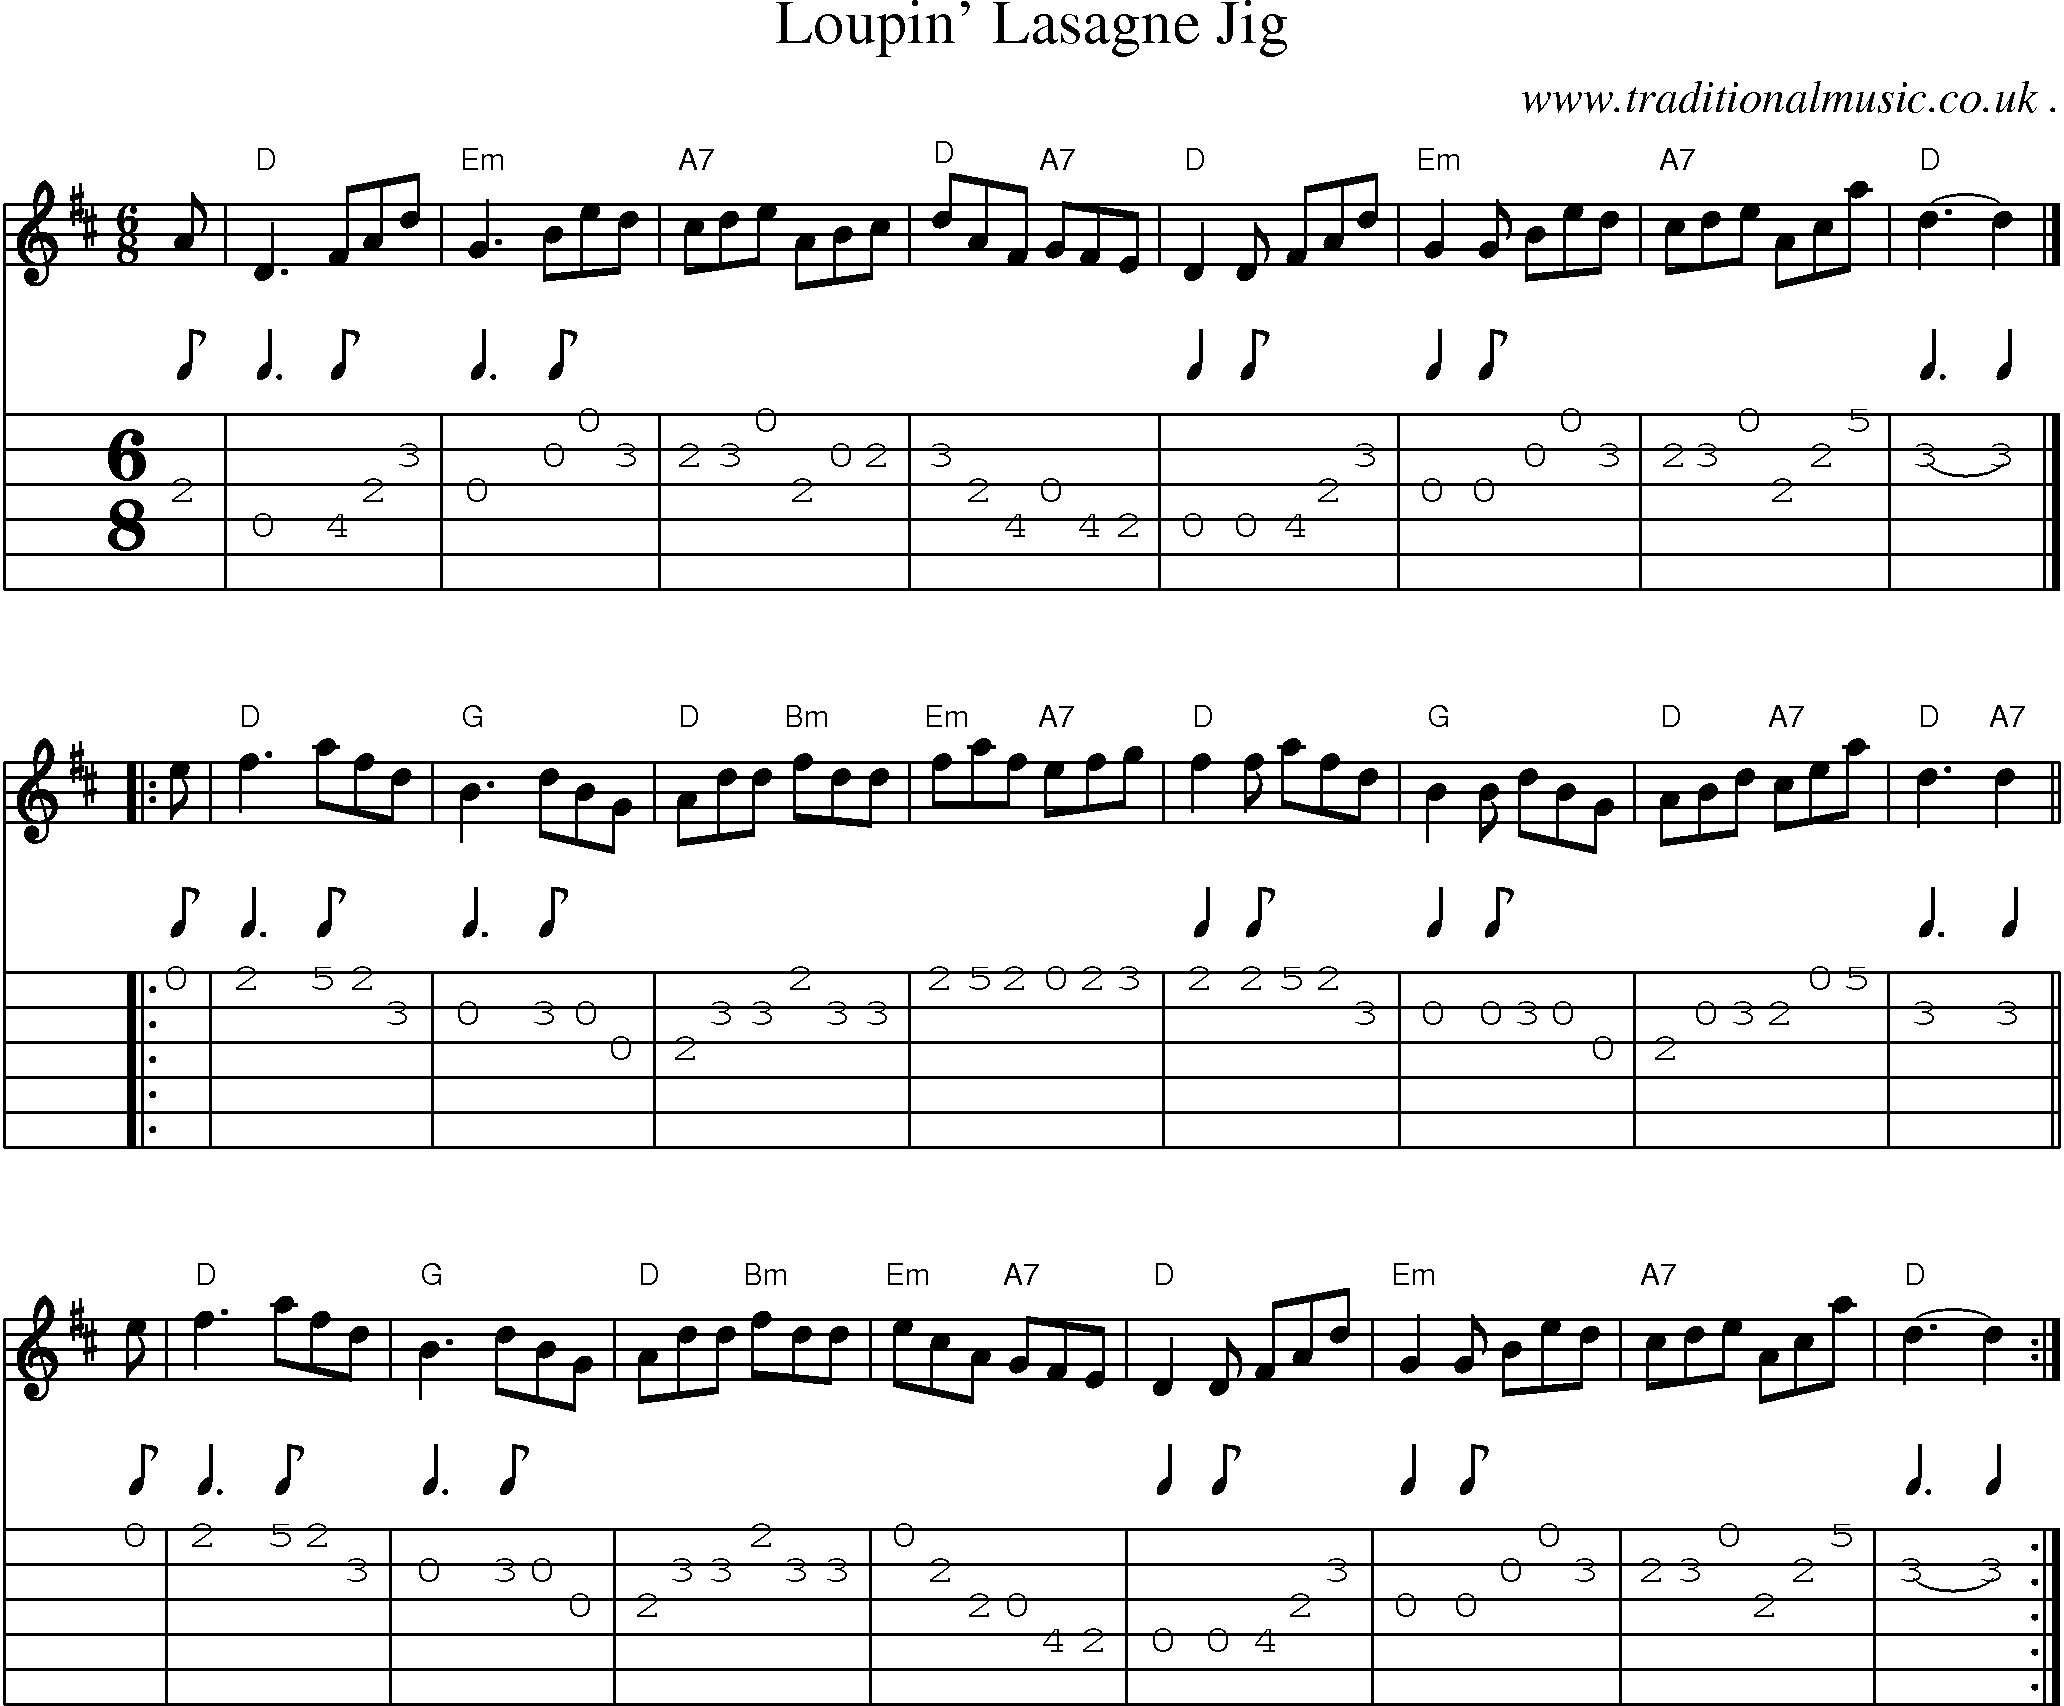 Sheet-music  score, Chords and Guitar Tabs for Loupin Lasagne Jig